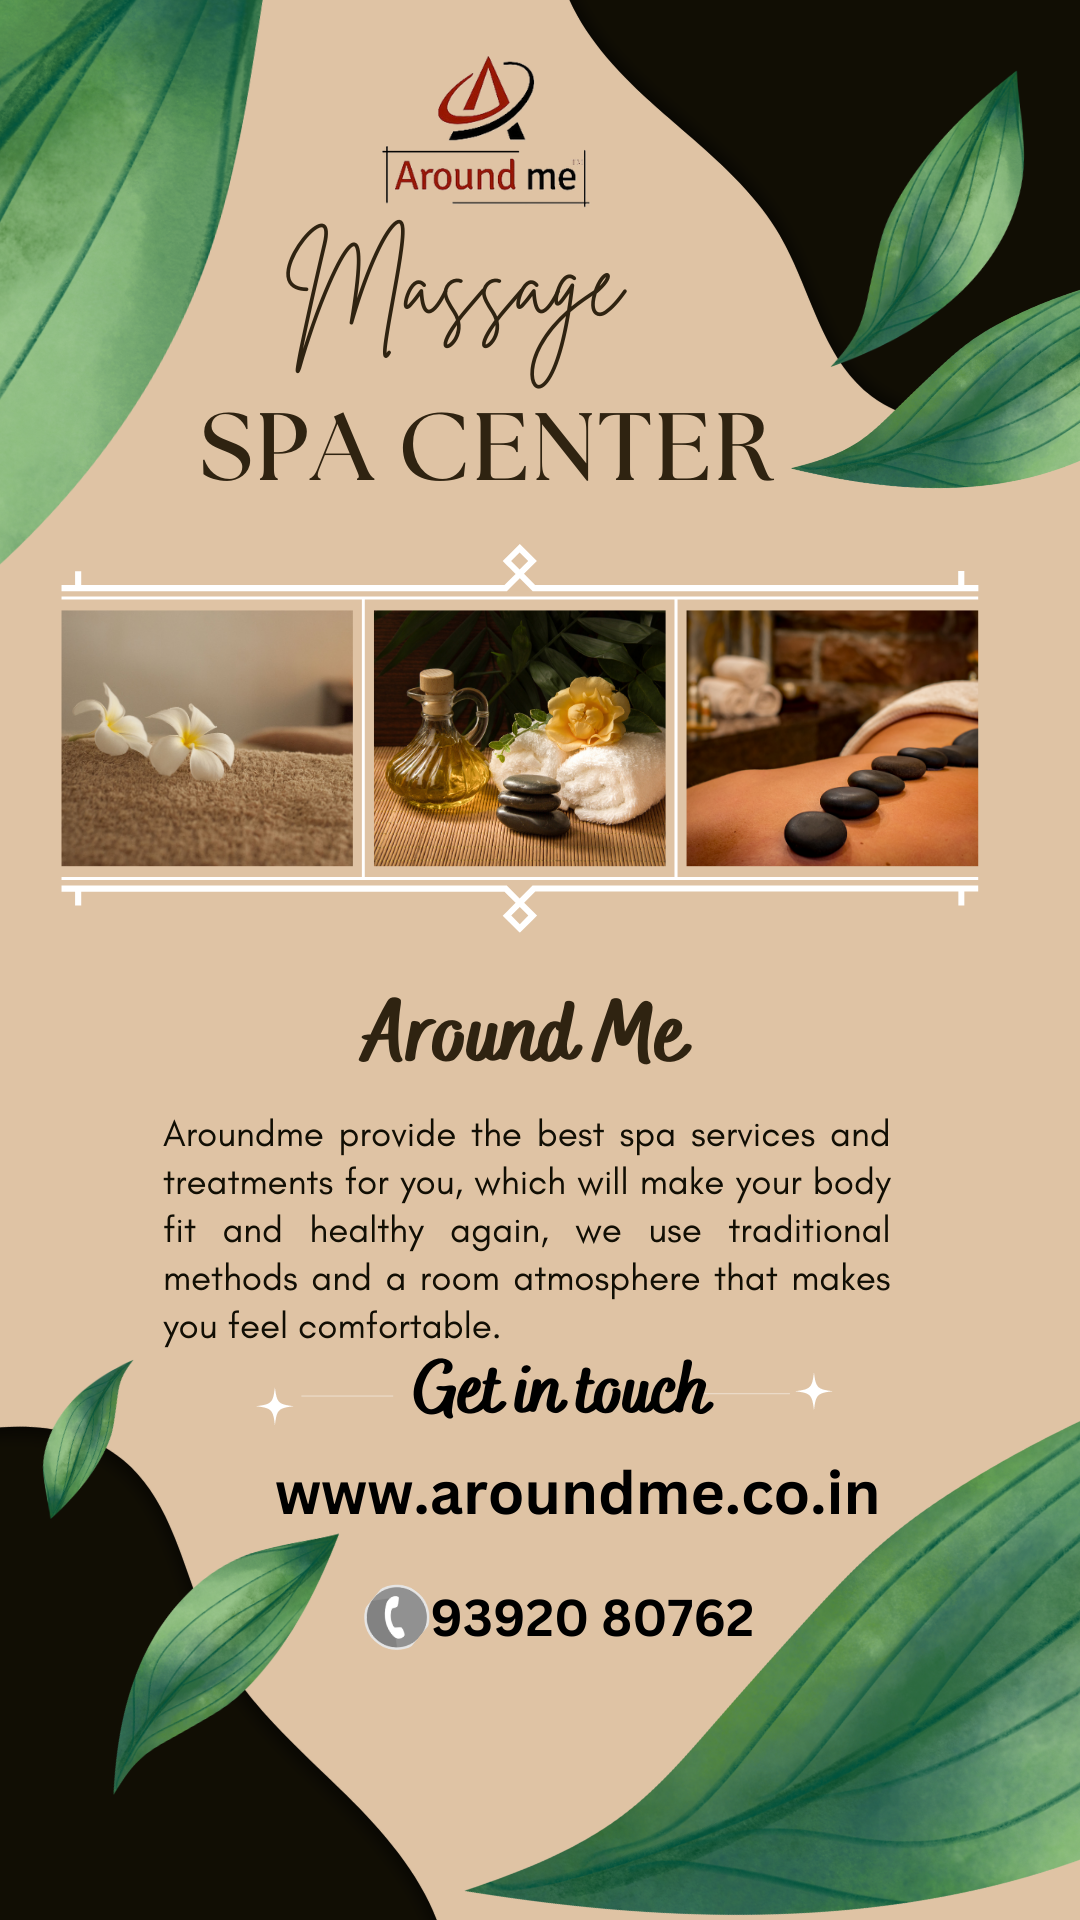 JZ

[Around me

hay

 

SPA

Around Me

Aroundme provide the best spa services and
treatments for you, which will make your body
fit and healthy again, we use traditional
methods and a room atmosphere that makes
you feel comfortable.

Get in touch

www.aroundme.co.in

   
  

93920 80762